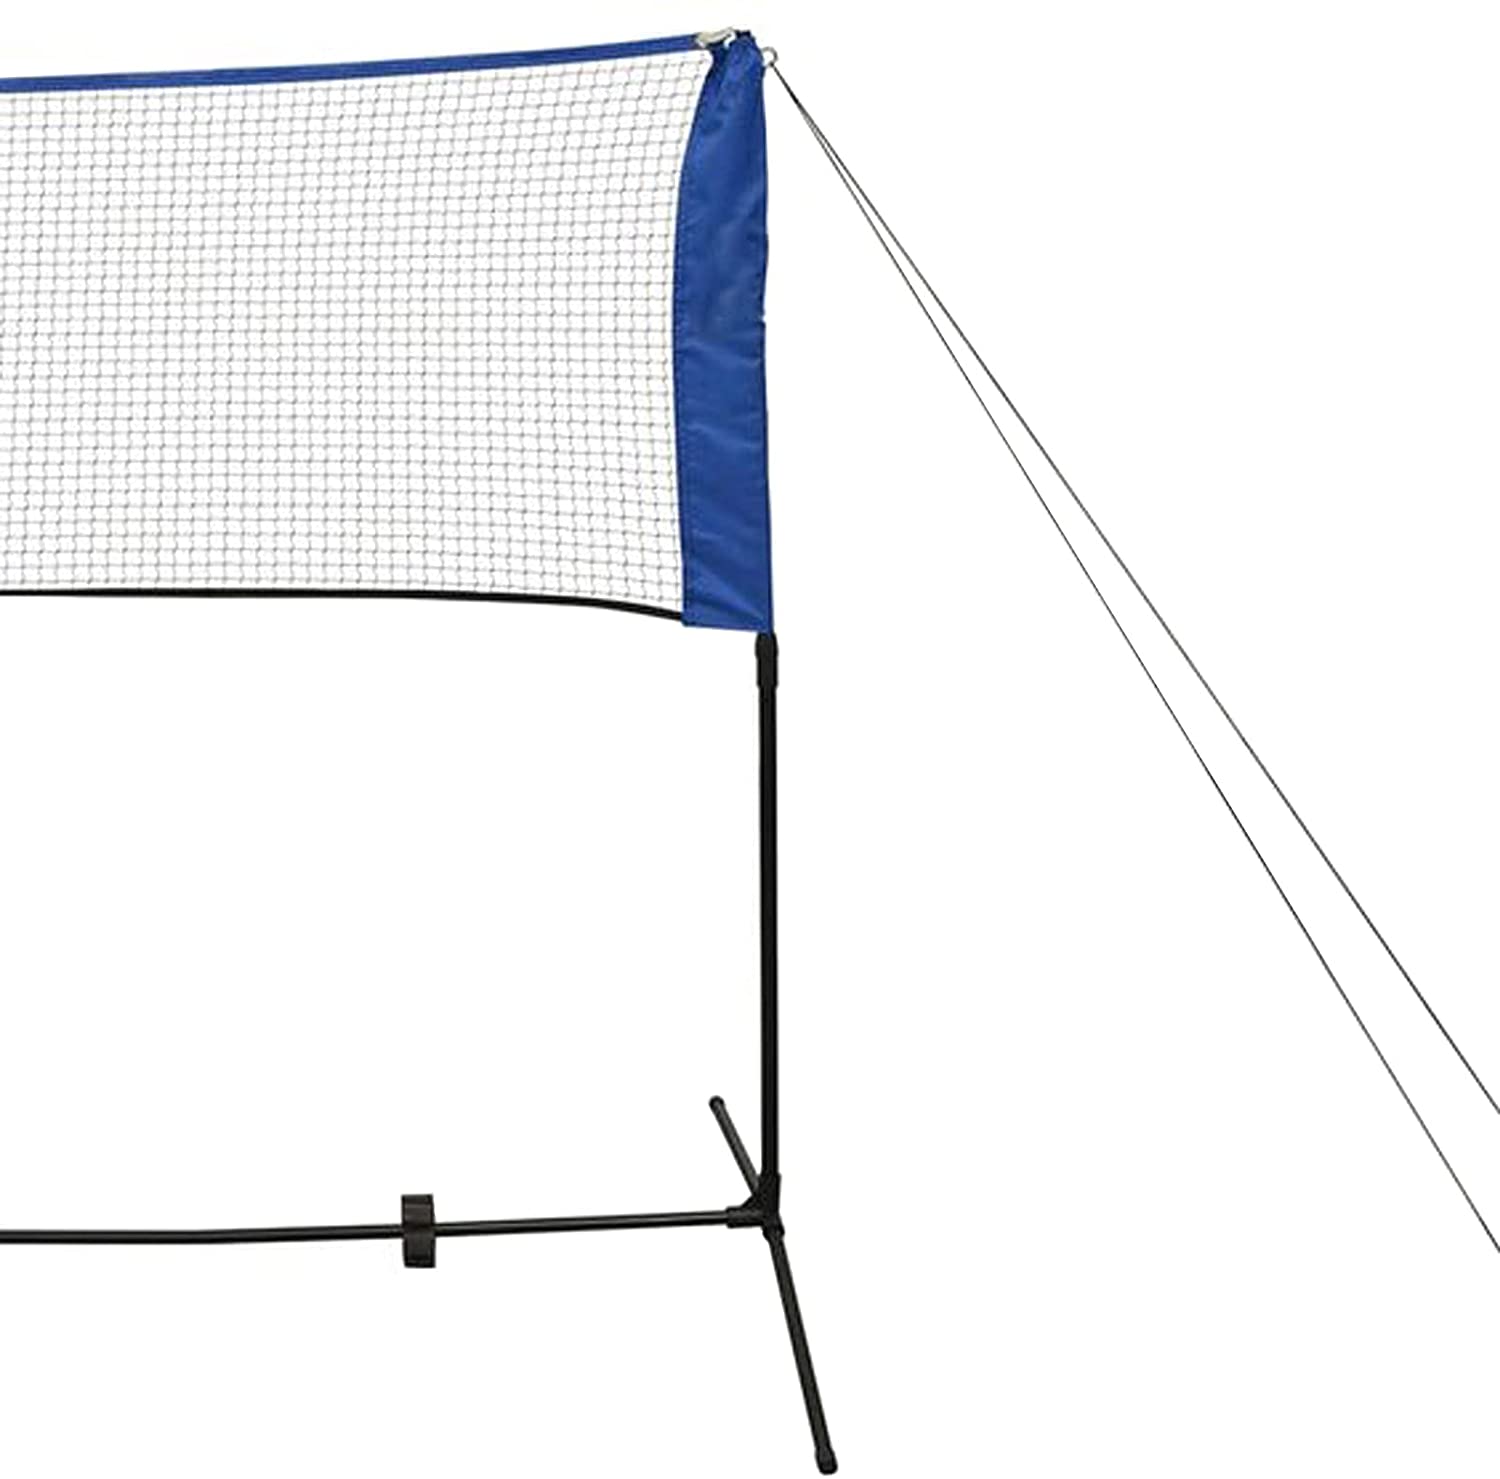 Amzdeal 17FT Portable Badminton and Volleyball Net Set, for Indoor Outdo